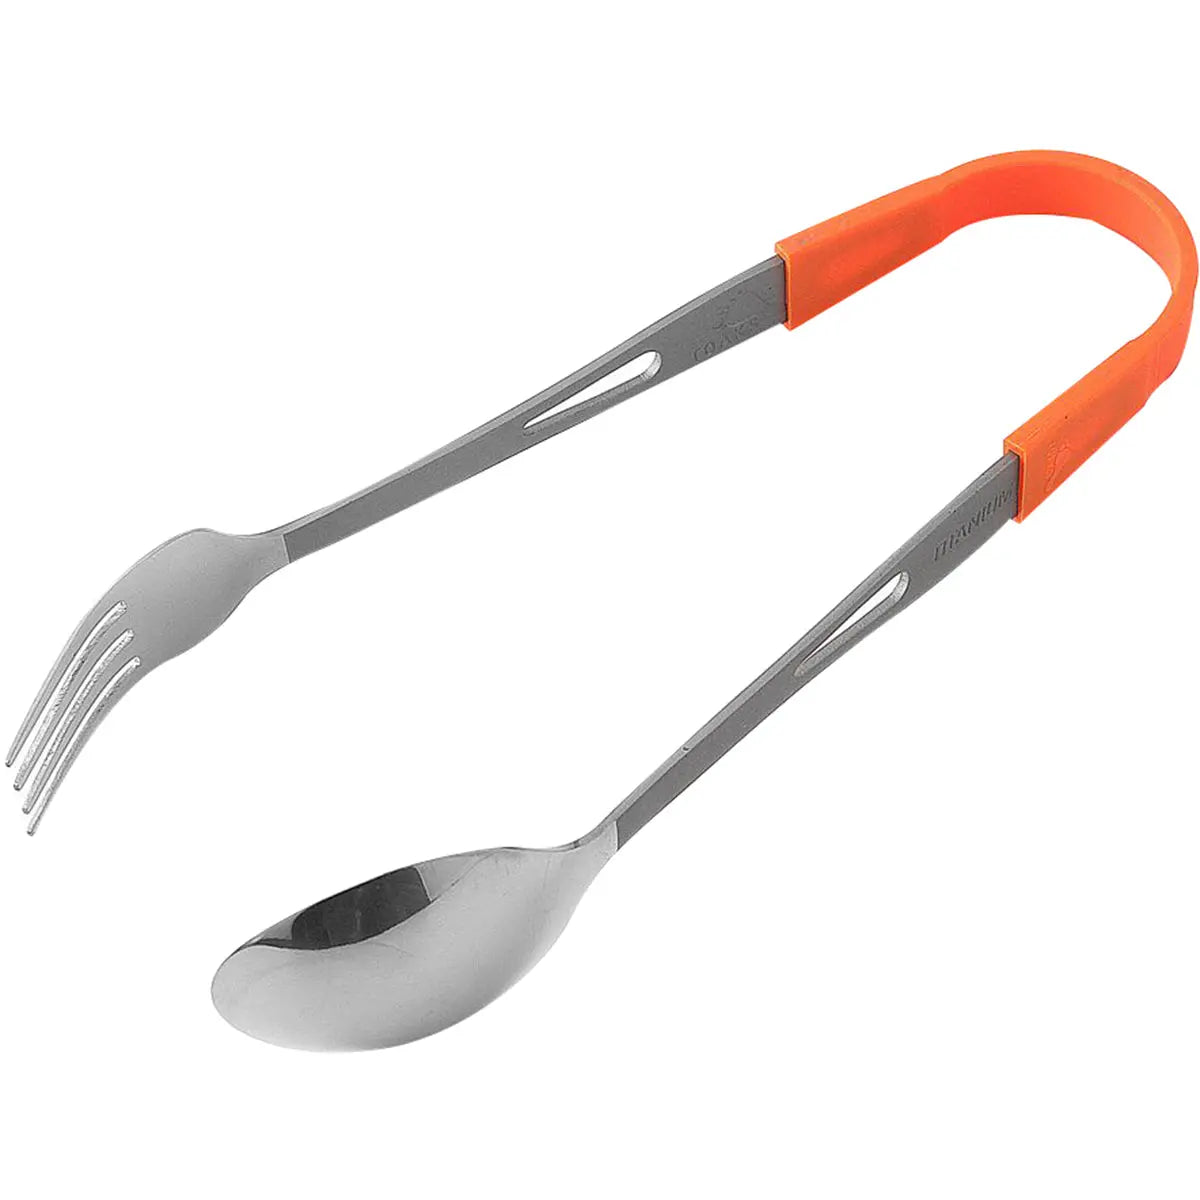 TOAKS Titongs Titanium Spoon and Fork Set with Nylon Connector TOAKS